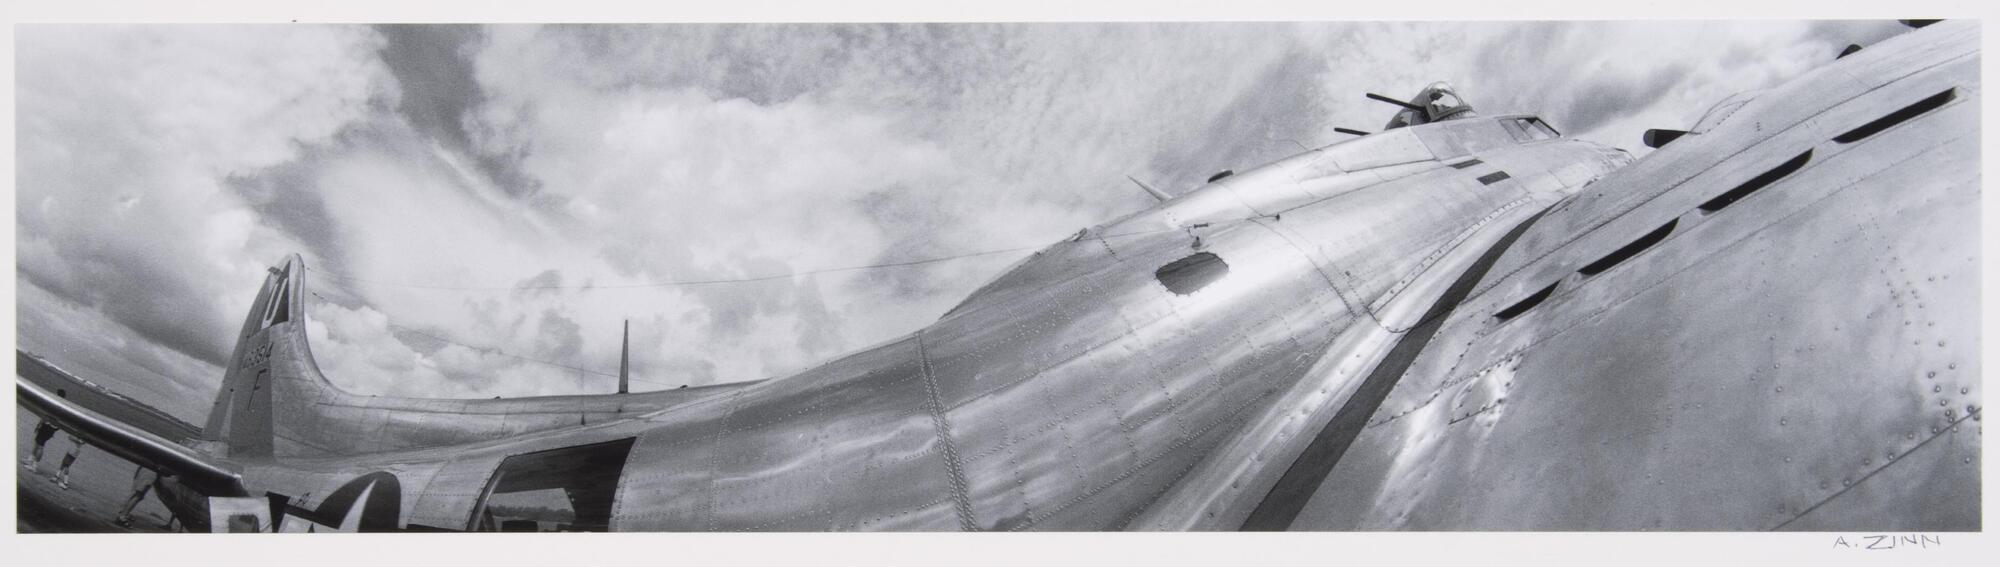 Wide angle view of the body of a silver plane and cloudy sky above.